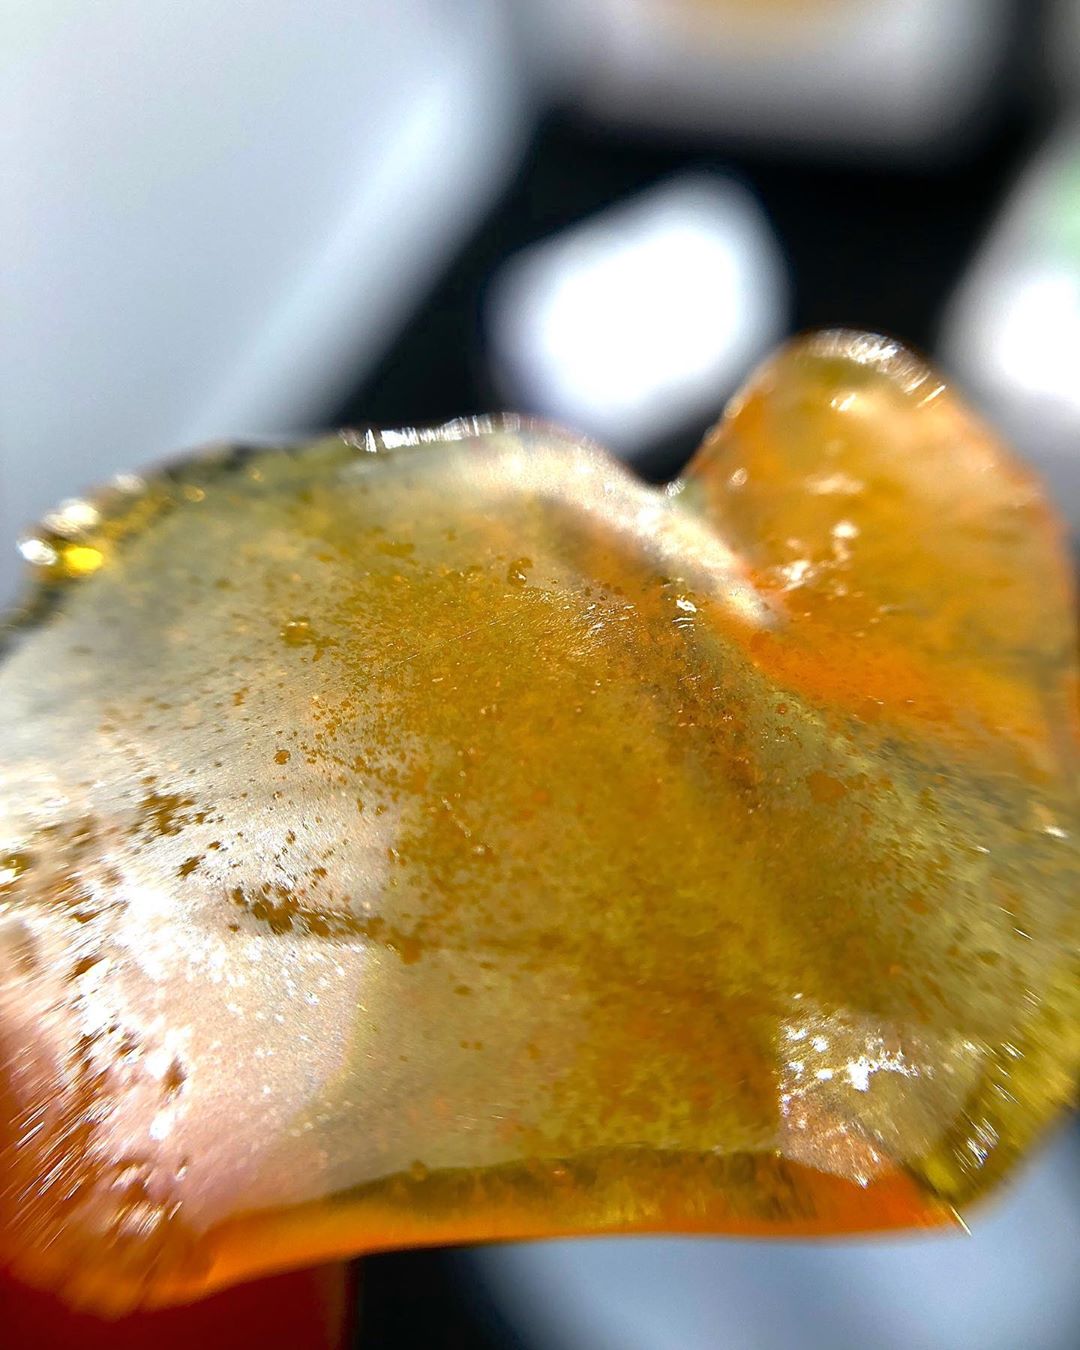 oregon lemons shatter from trulieve concentrate review by shanchyrls